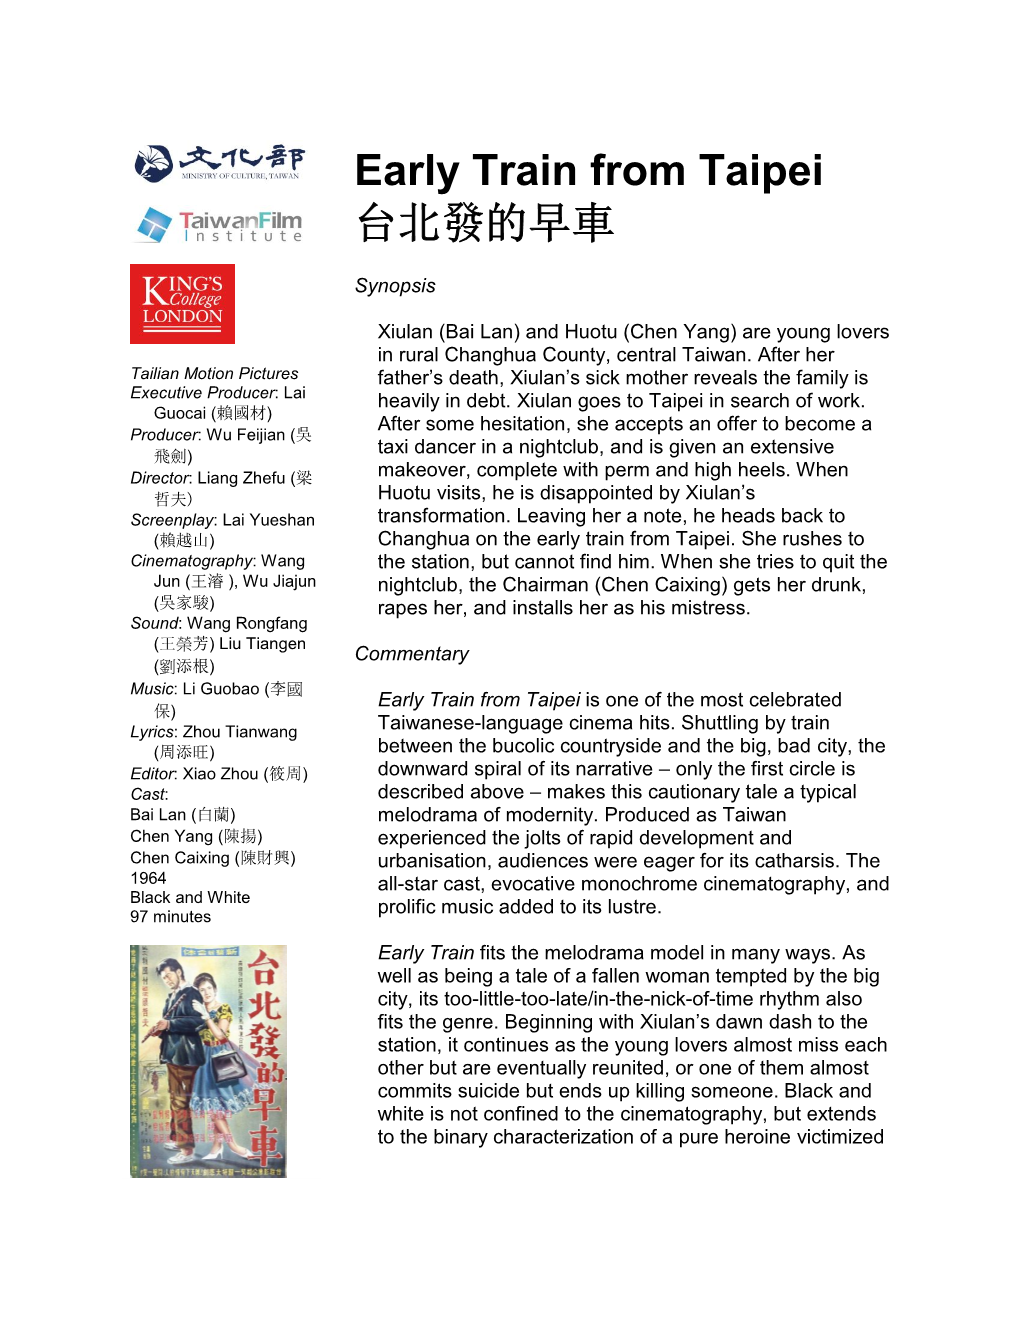 Early Train from Taipei 台北發的早車